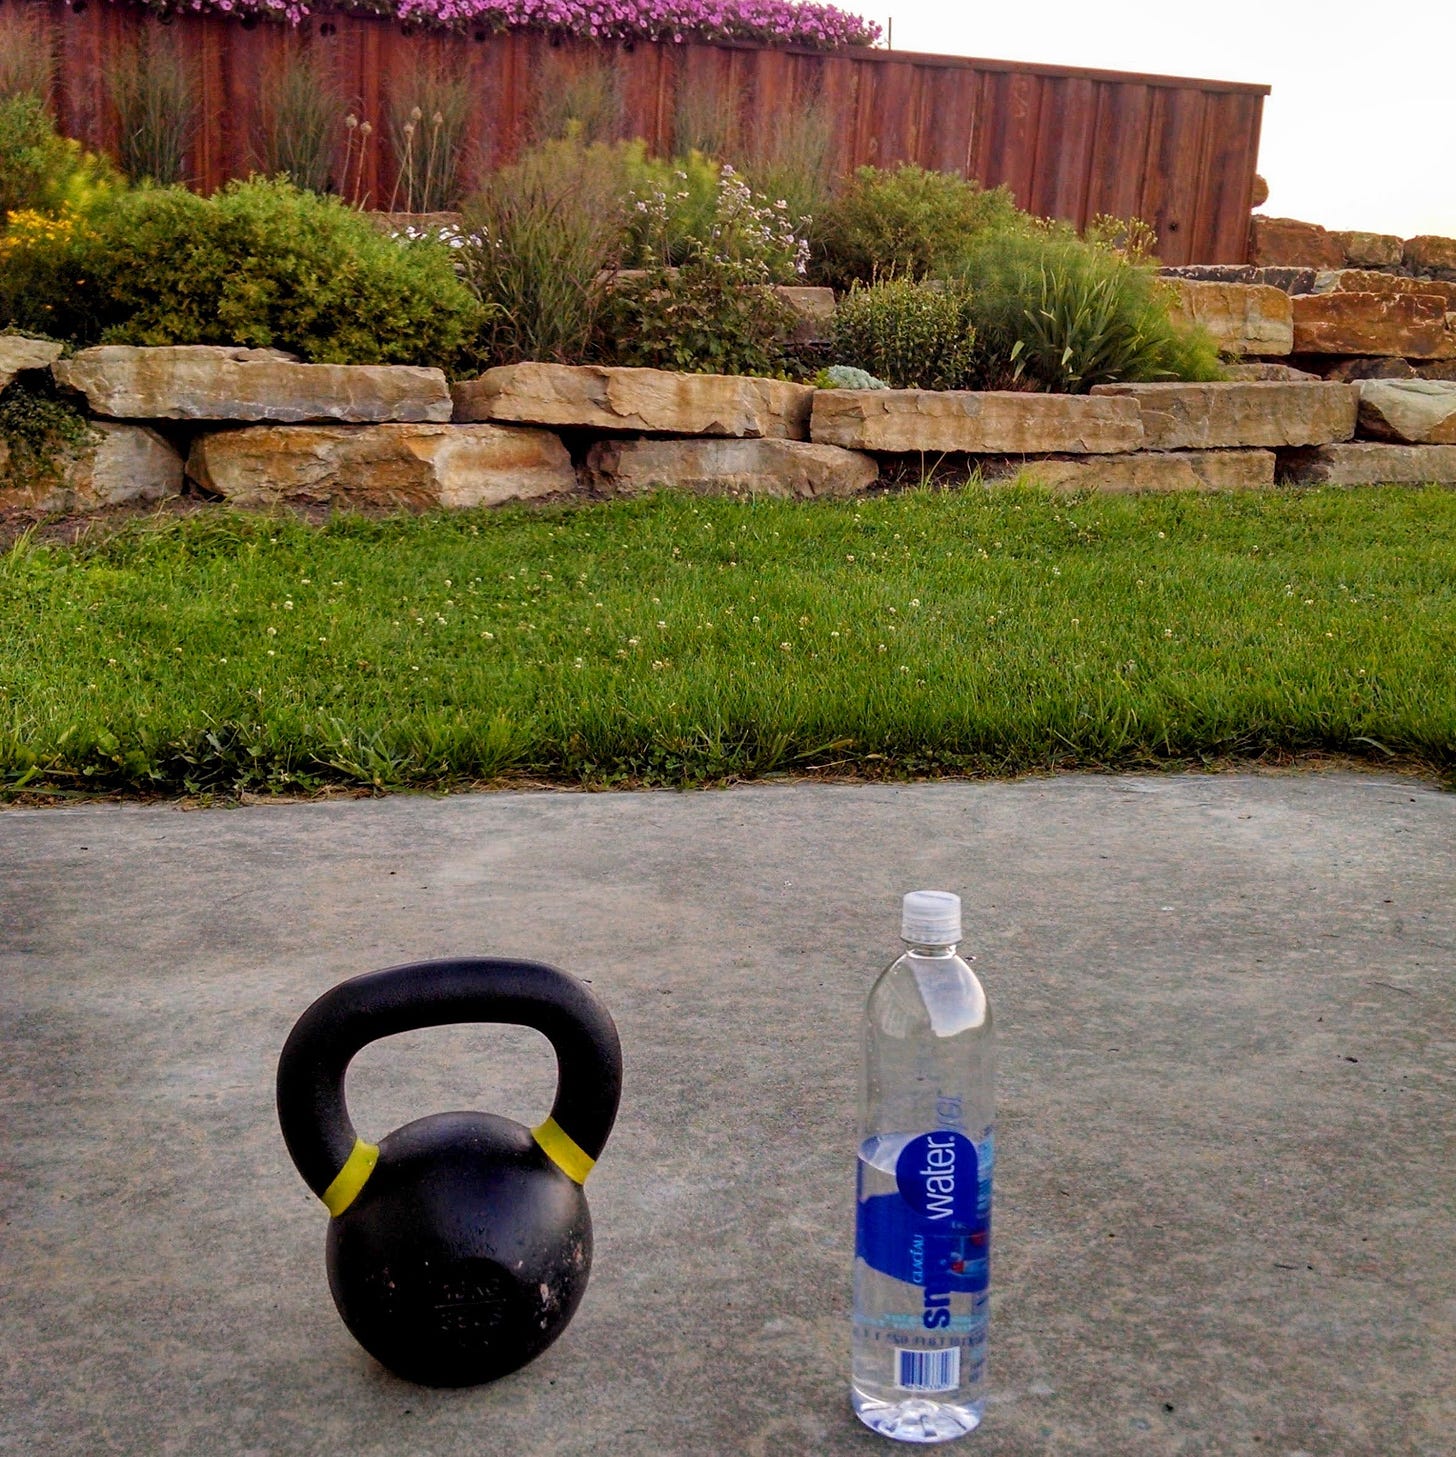 A kettlebell and a bottle of water on a patio, with a retaining wall planted with shrubs and flowers.